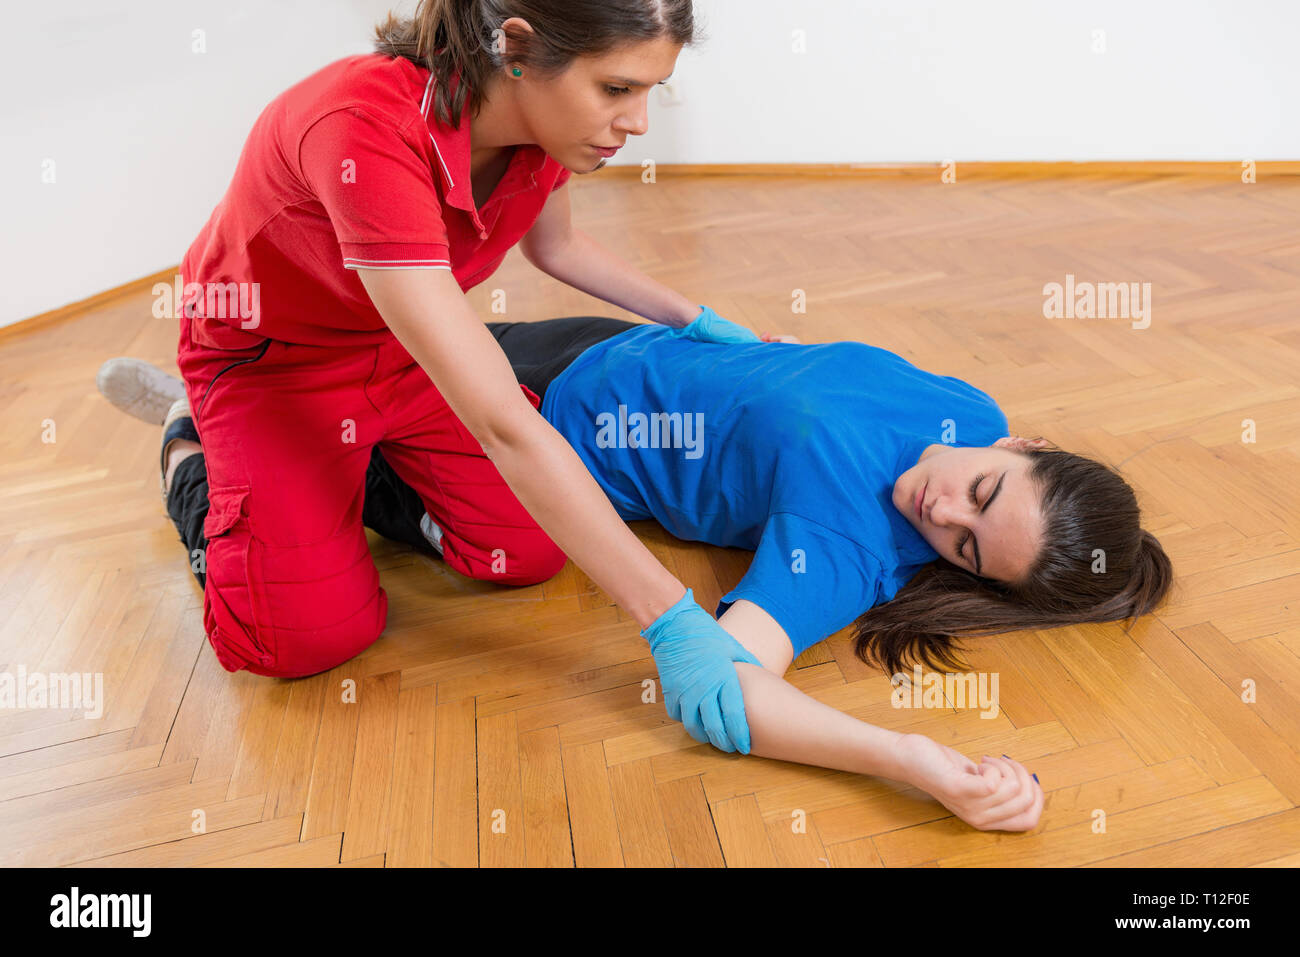 First Aid Training. Food Poisoning. First aid course. Stock Photo